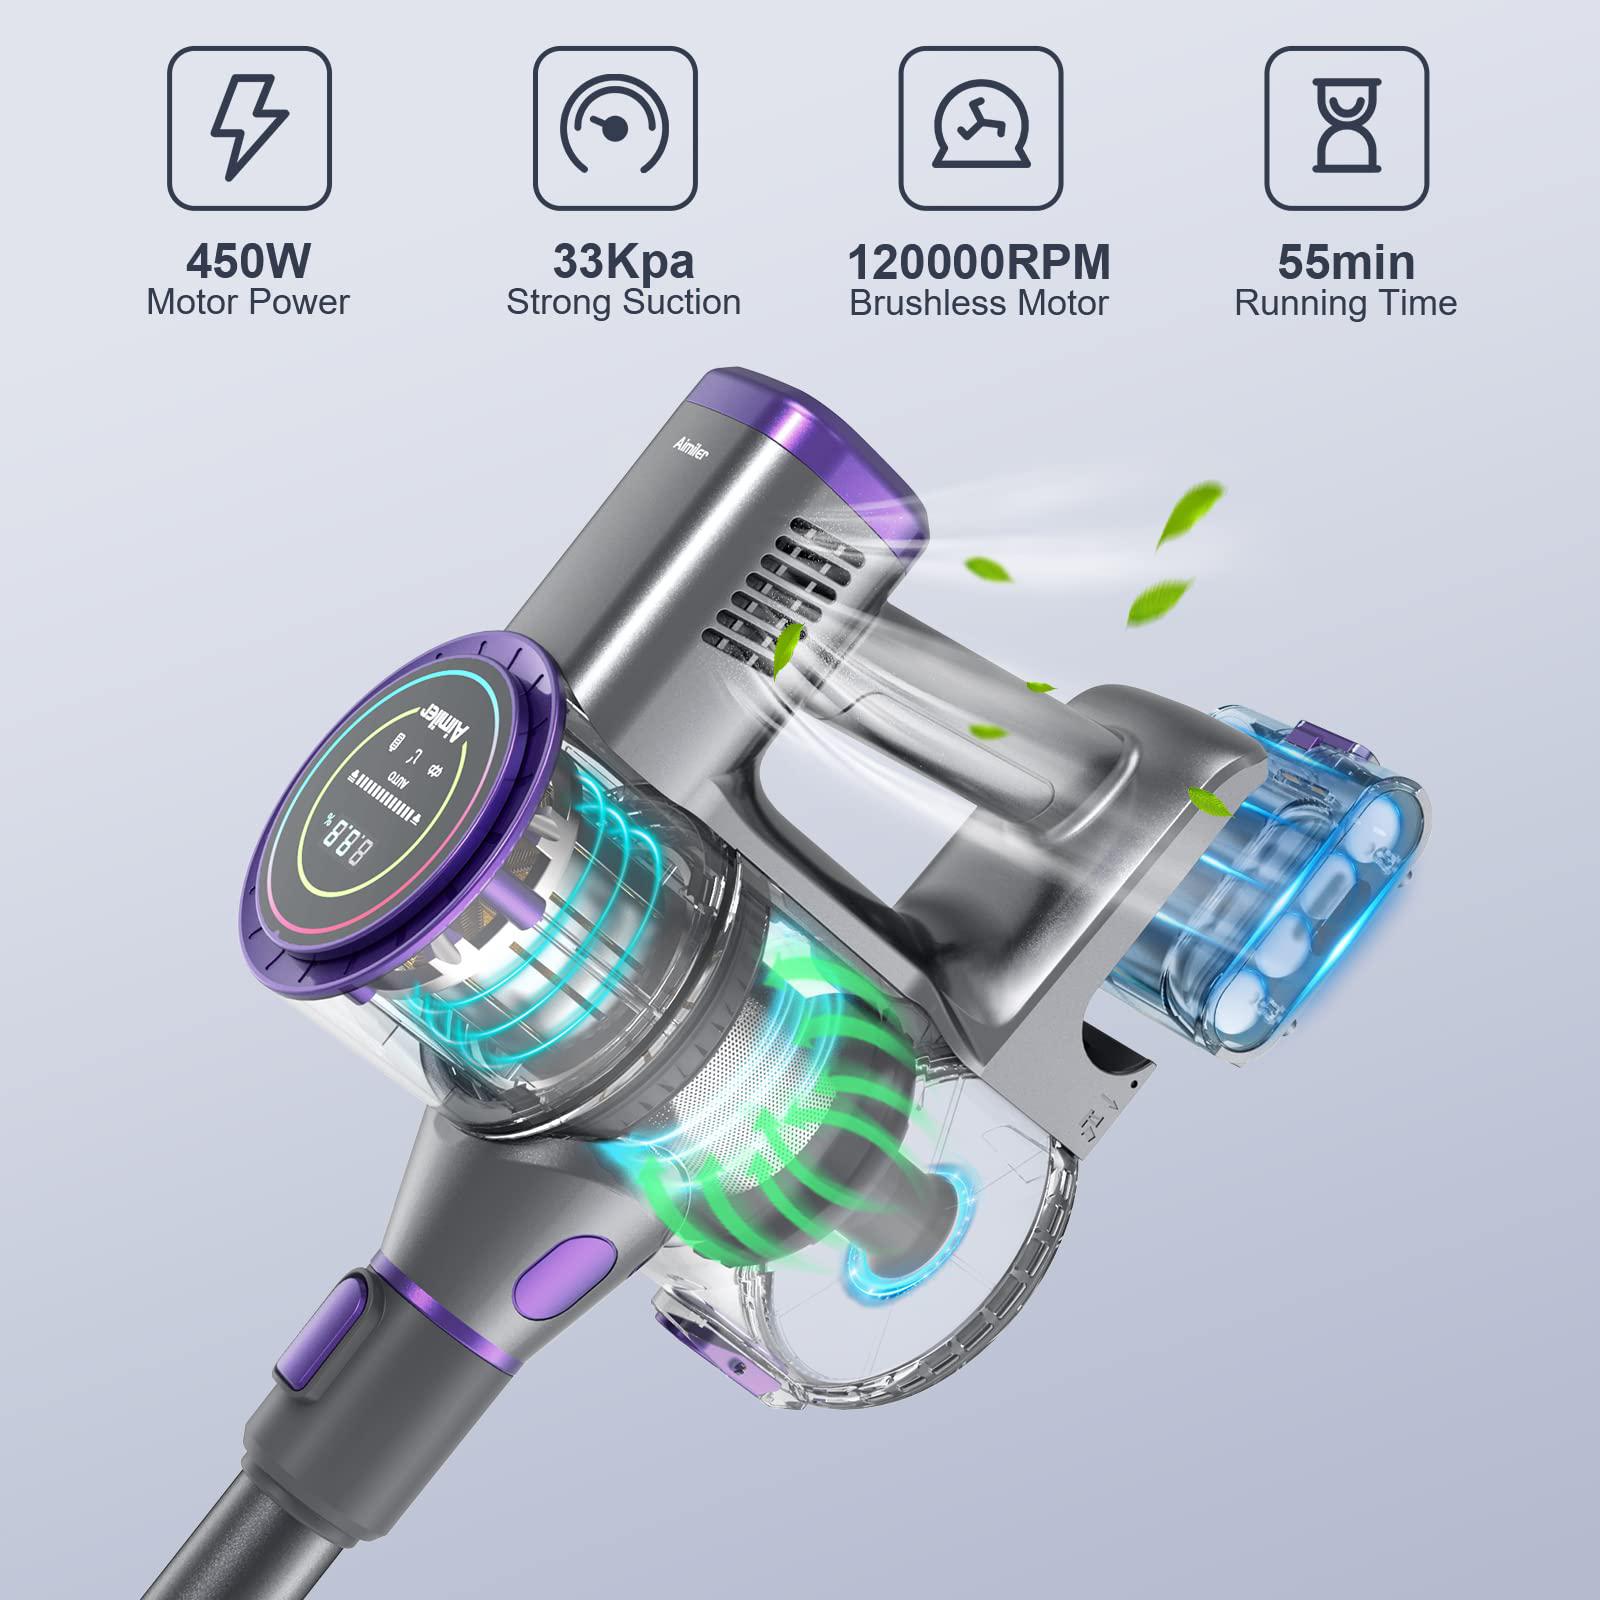 aimiler cordless vacuum cleaner, 450w cordless stick vacuum with 33kpa powerful suction, 55min runtime, detachable battery, s